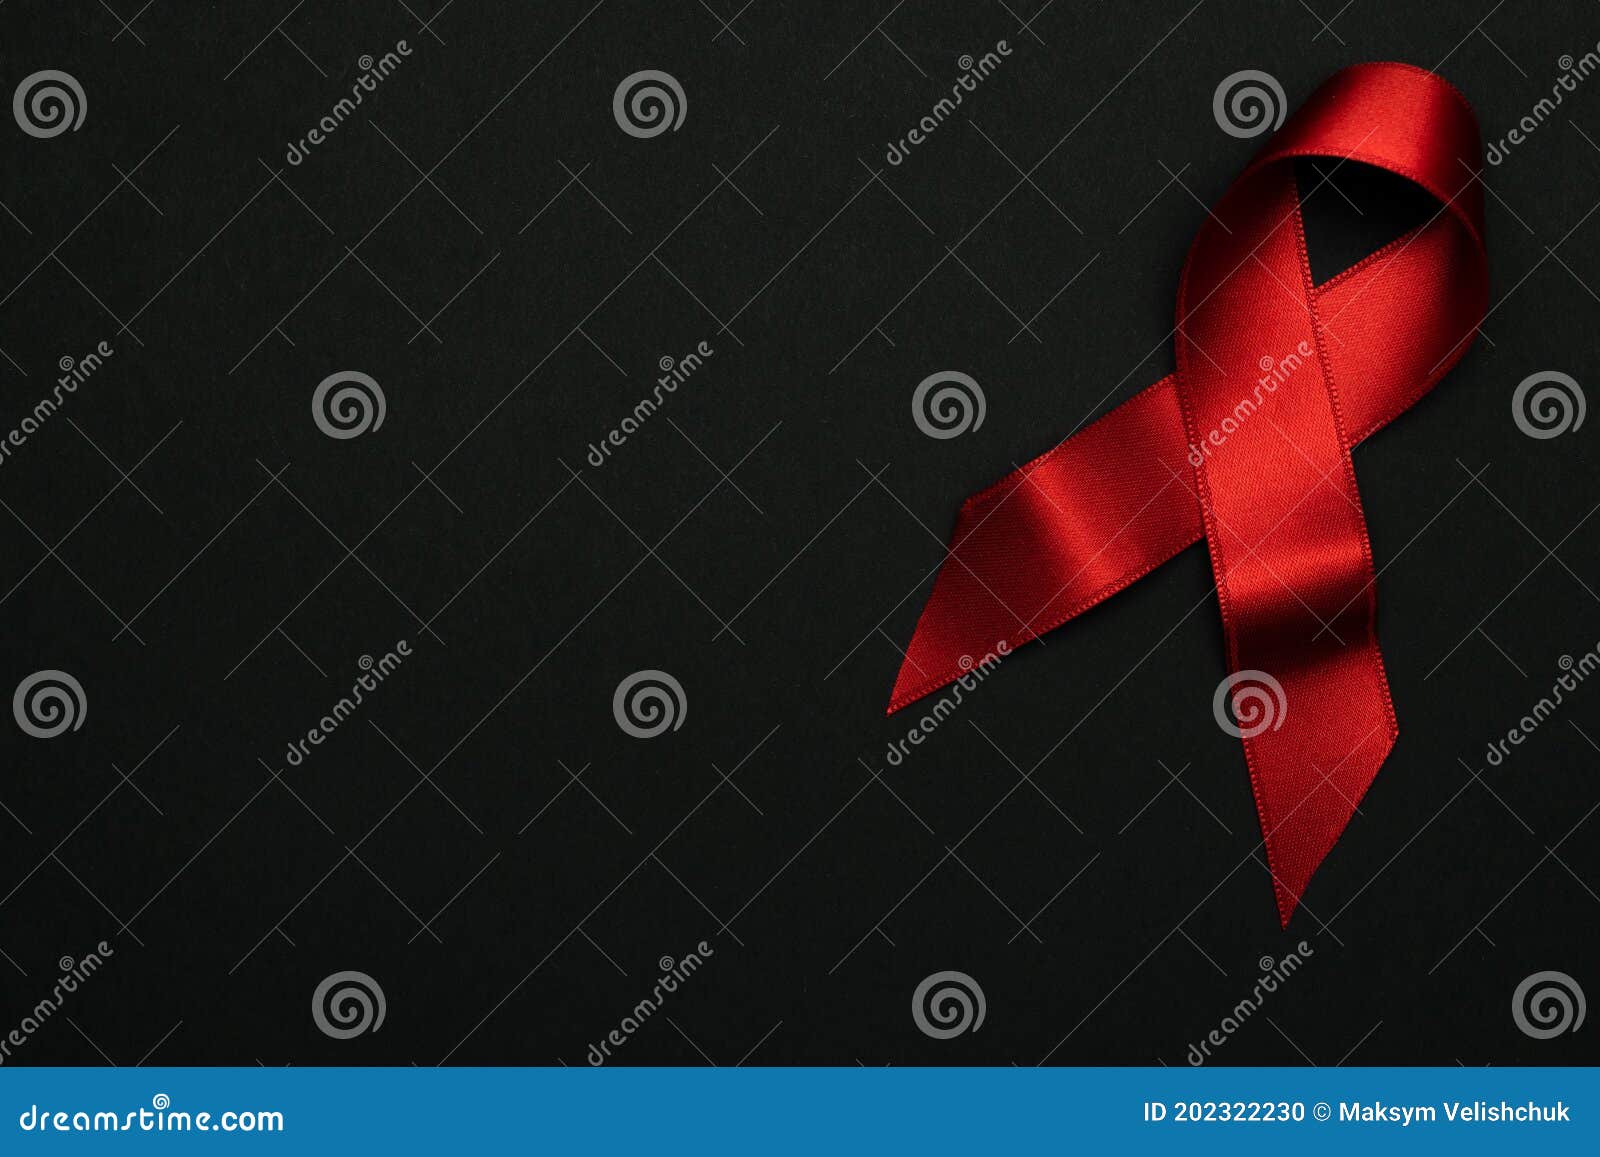 Hiv Virus. Red Ribbon Symbol in Hiv World Day on Dark Background. Awareness  Aids and Cancer. Health, Medical Sign Stock Photo - Image of injury, world:  202322230